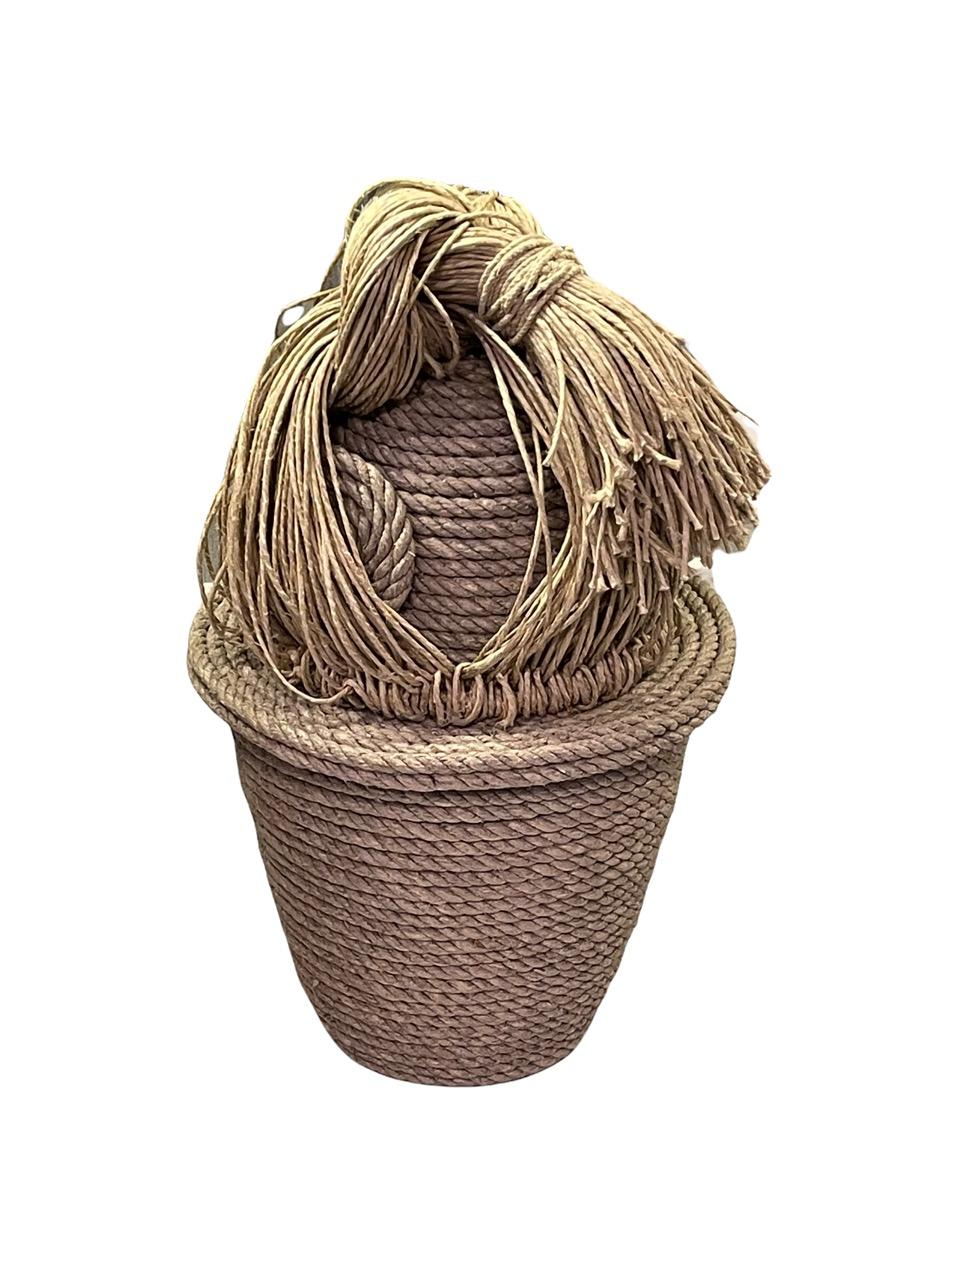 Pair of Contemporary 21st Century French Christian Astuguevieille Jute Rope Co For Sale 4